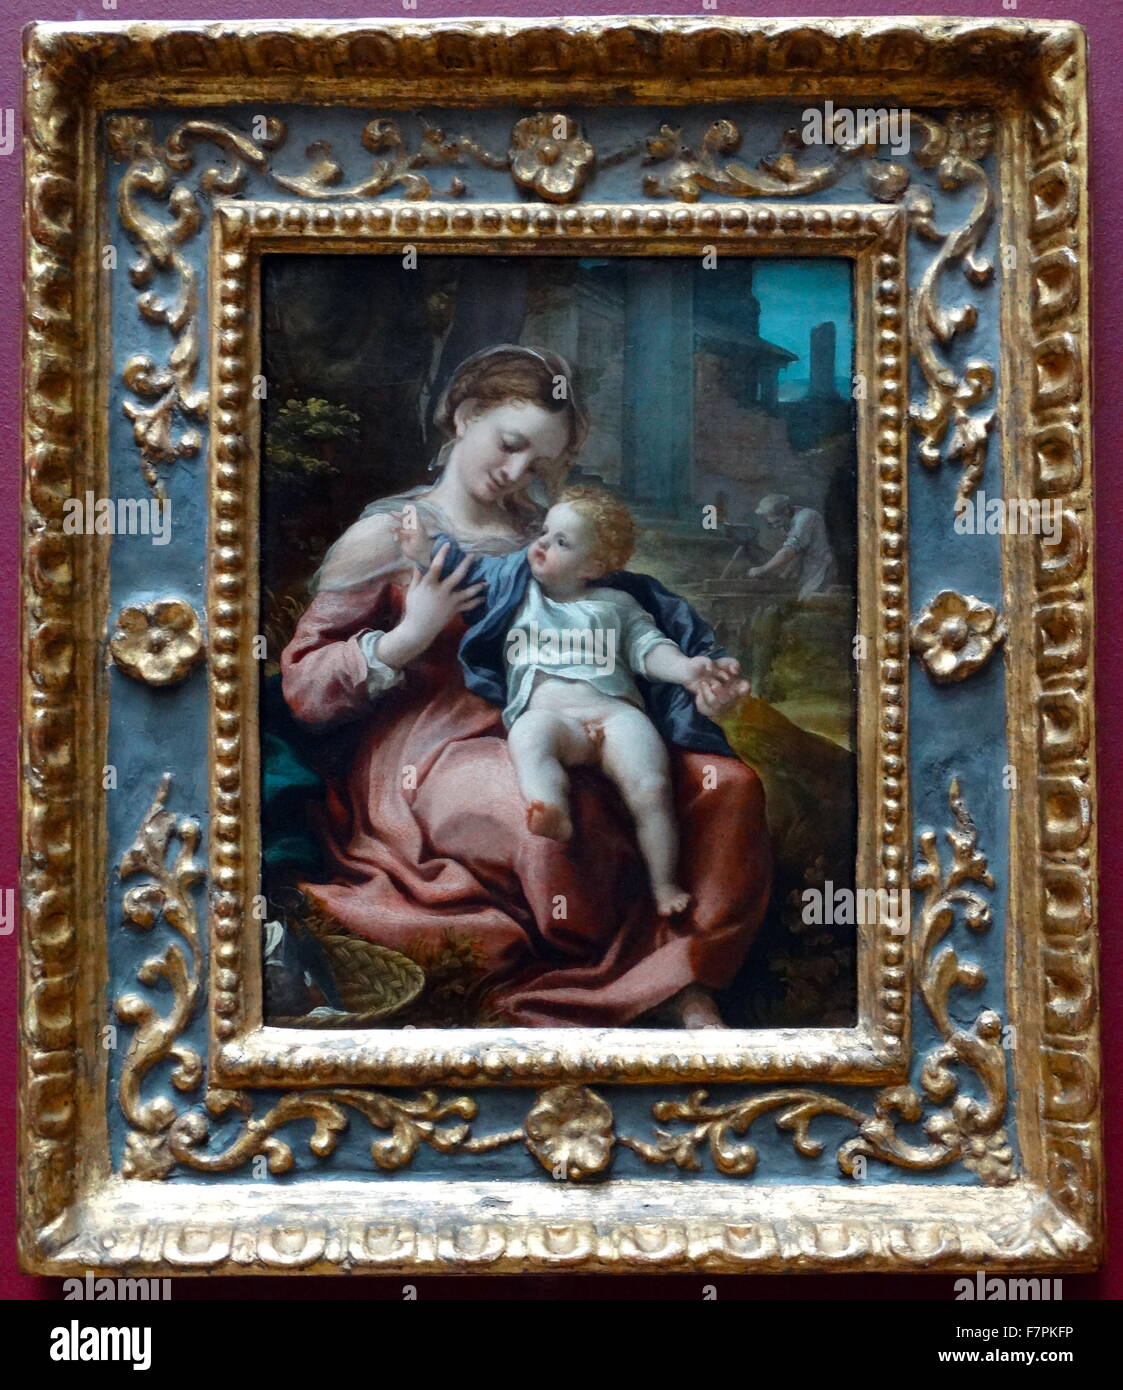 Painting titled 'The Madonna and the Basket' by Antonio da Correggio (1489-1534) painter of the Parma school of the Italian Renaissance. Dated 16th Century Stock Photo